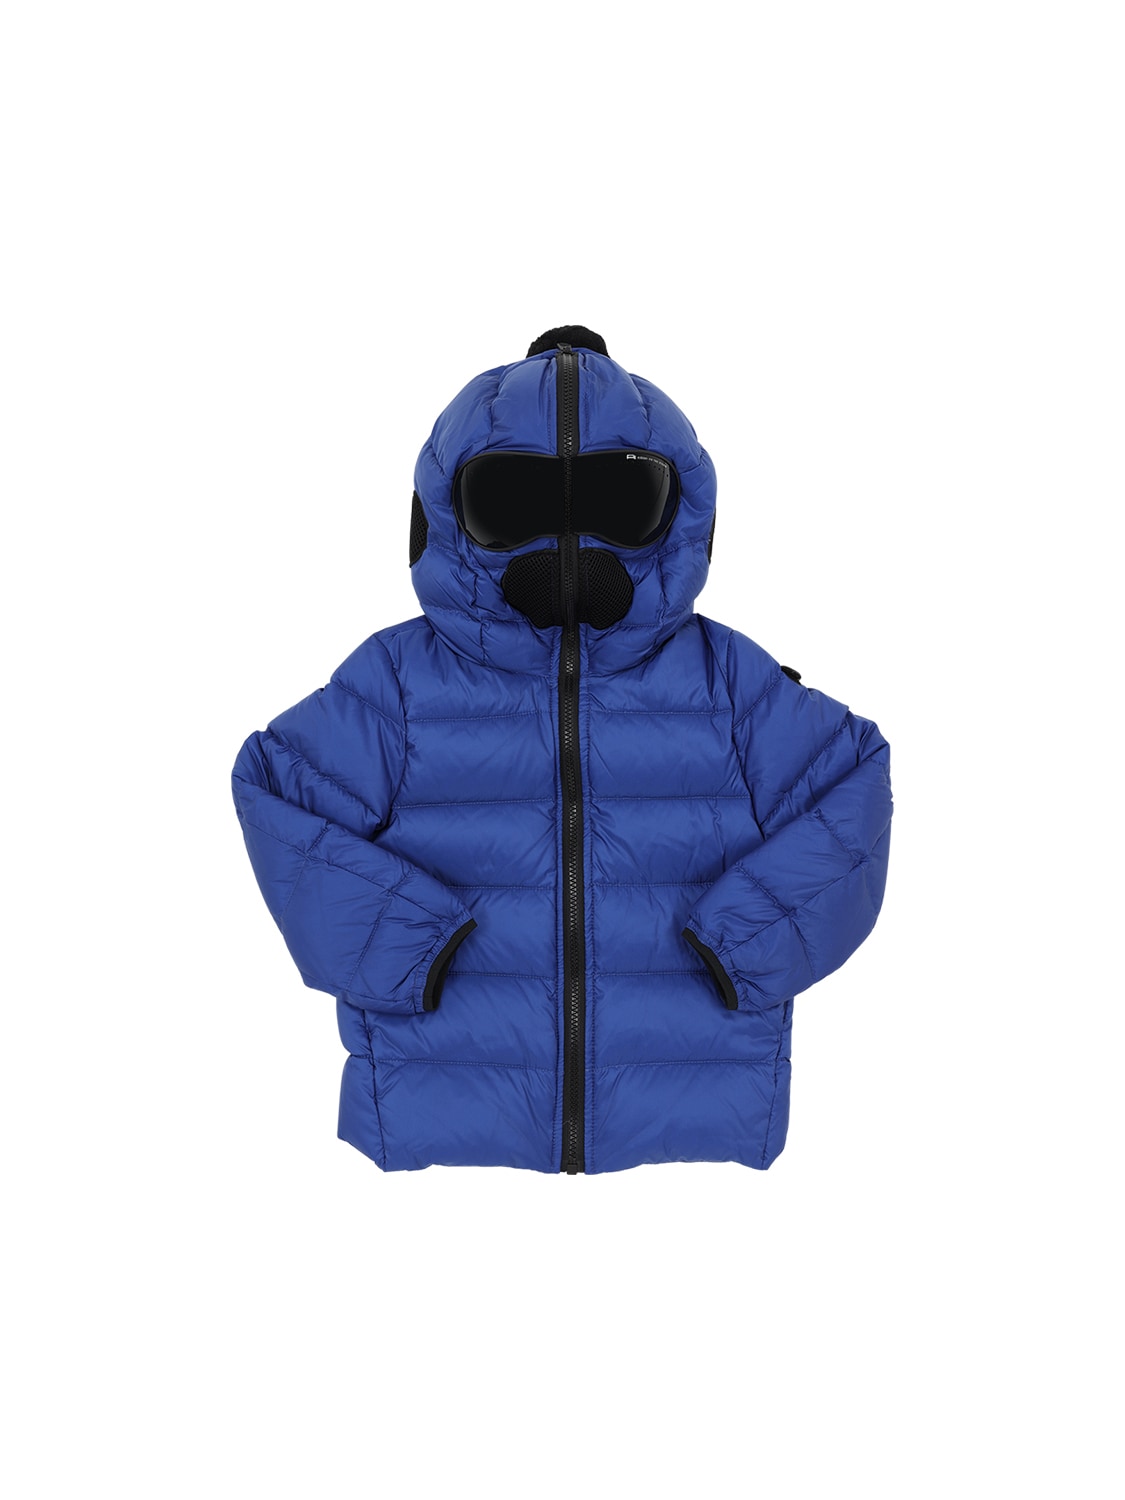 Ai Riders On The Storm Kids' Water Resistant Nylon Down Jacket In Royal Blue